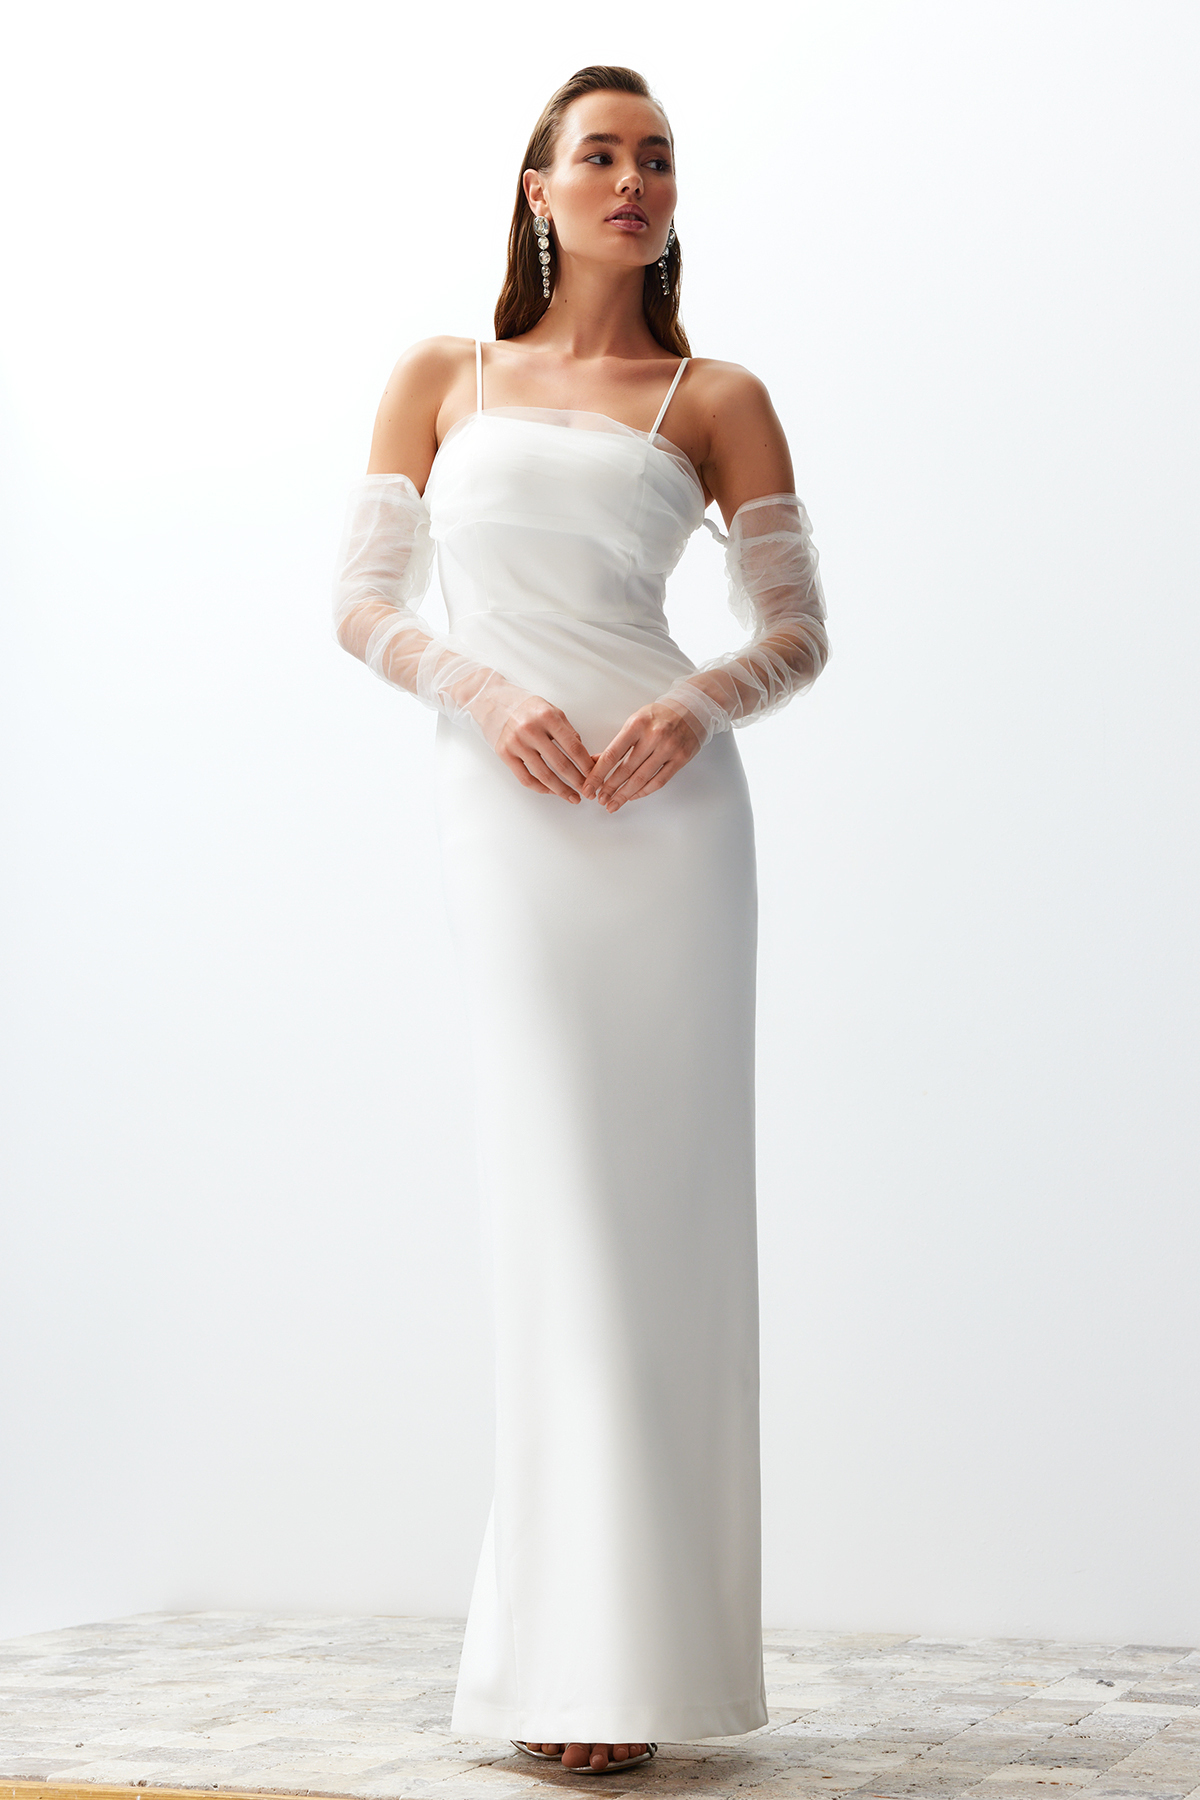 Trendyol White Body-fitting Long Evening Evening Dress with Woven Lining